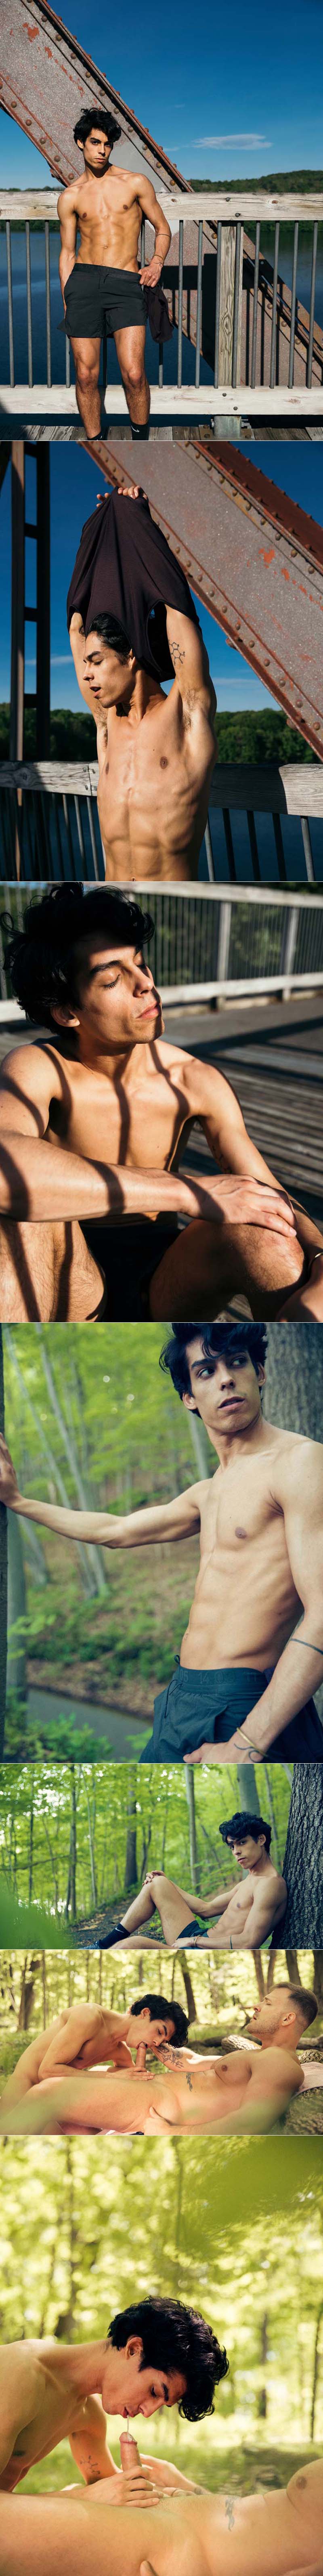 Sizzle In The Woods (Austin Wolf Fucks Nico Leon) at CockyBoys.com